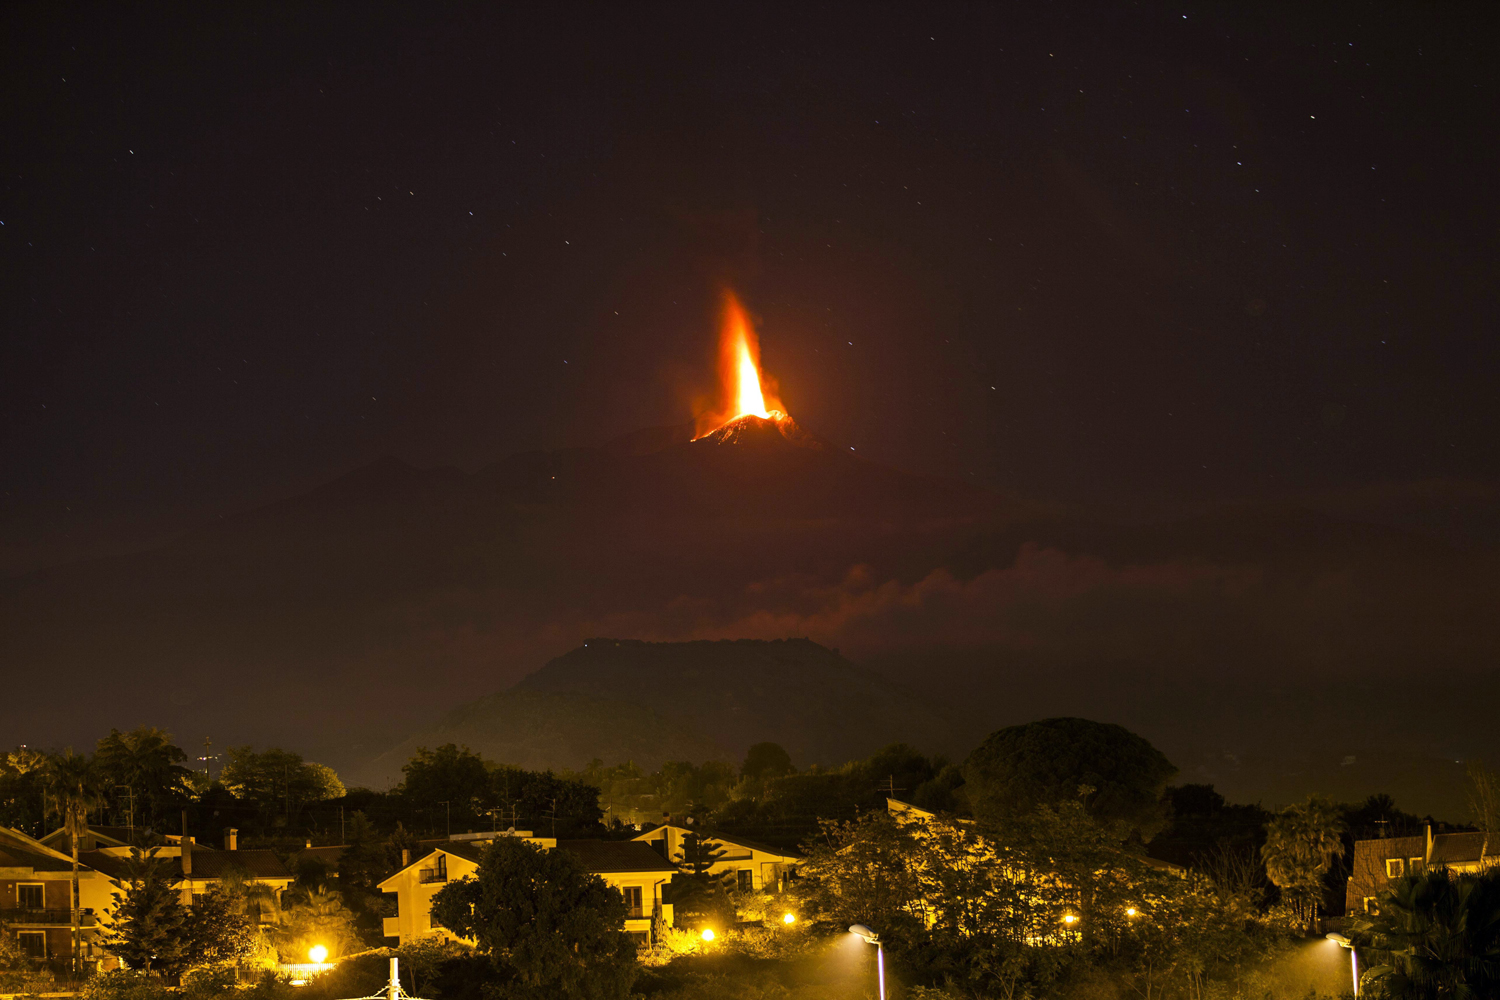 Oct. 26, 2013. Lava flows during an eruption of Mount Etna volcano as seen from the village of Viagrande, near the Sicilian town of Catania, Italy.